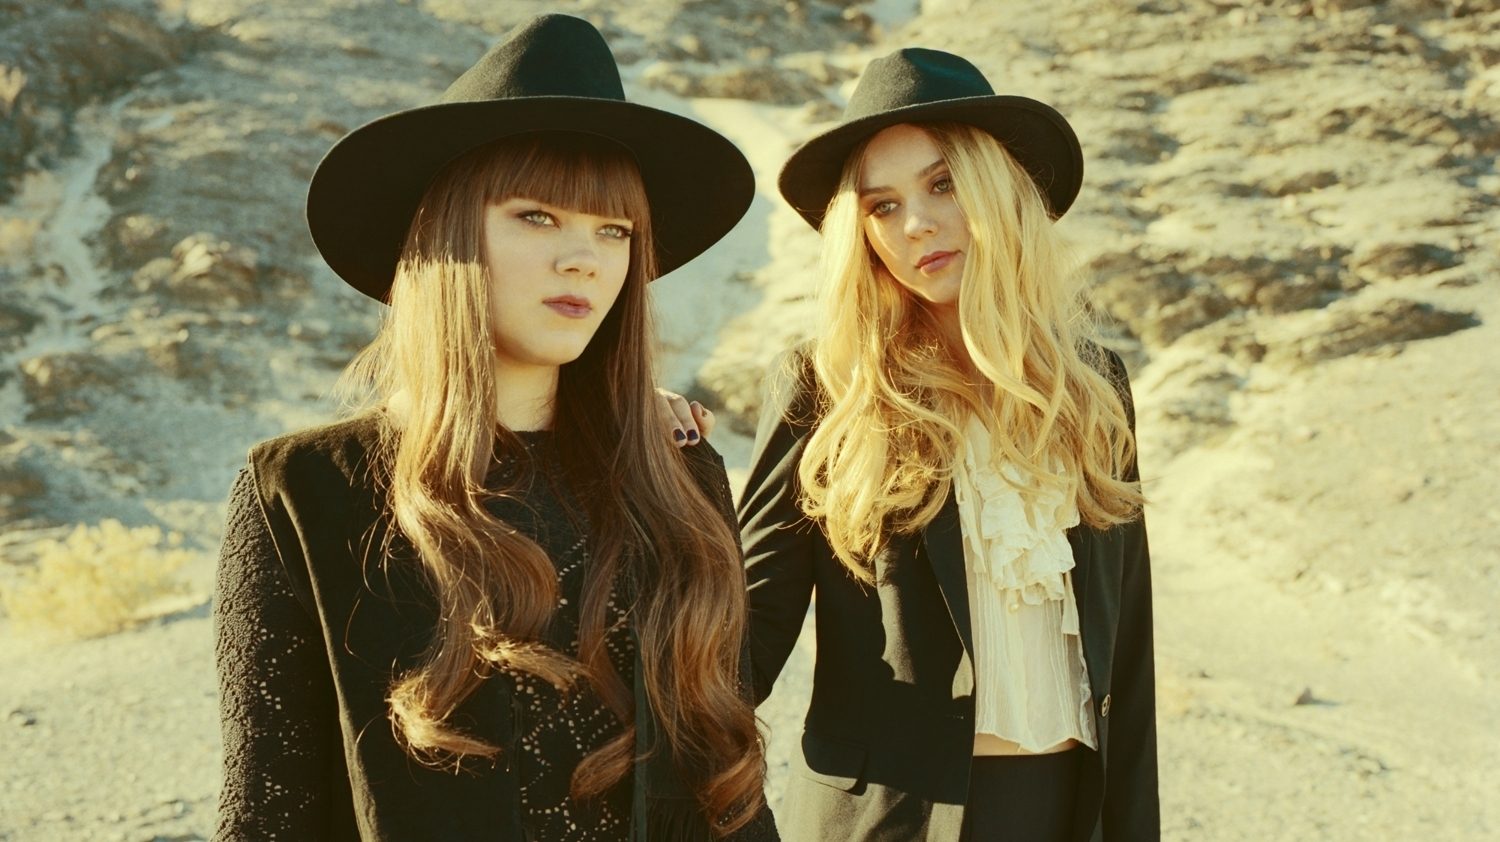 First Aid Kit @ Stubb's 10/14 (ACL Fest Late Night Show)